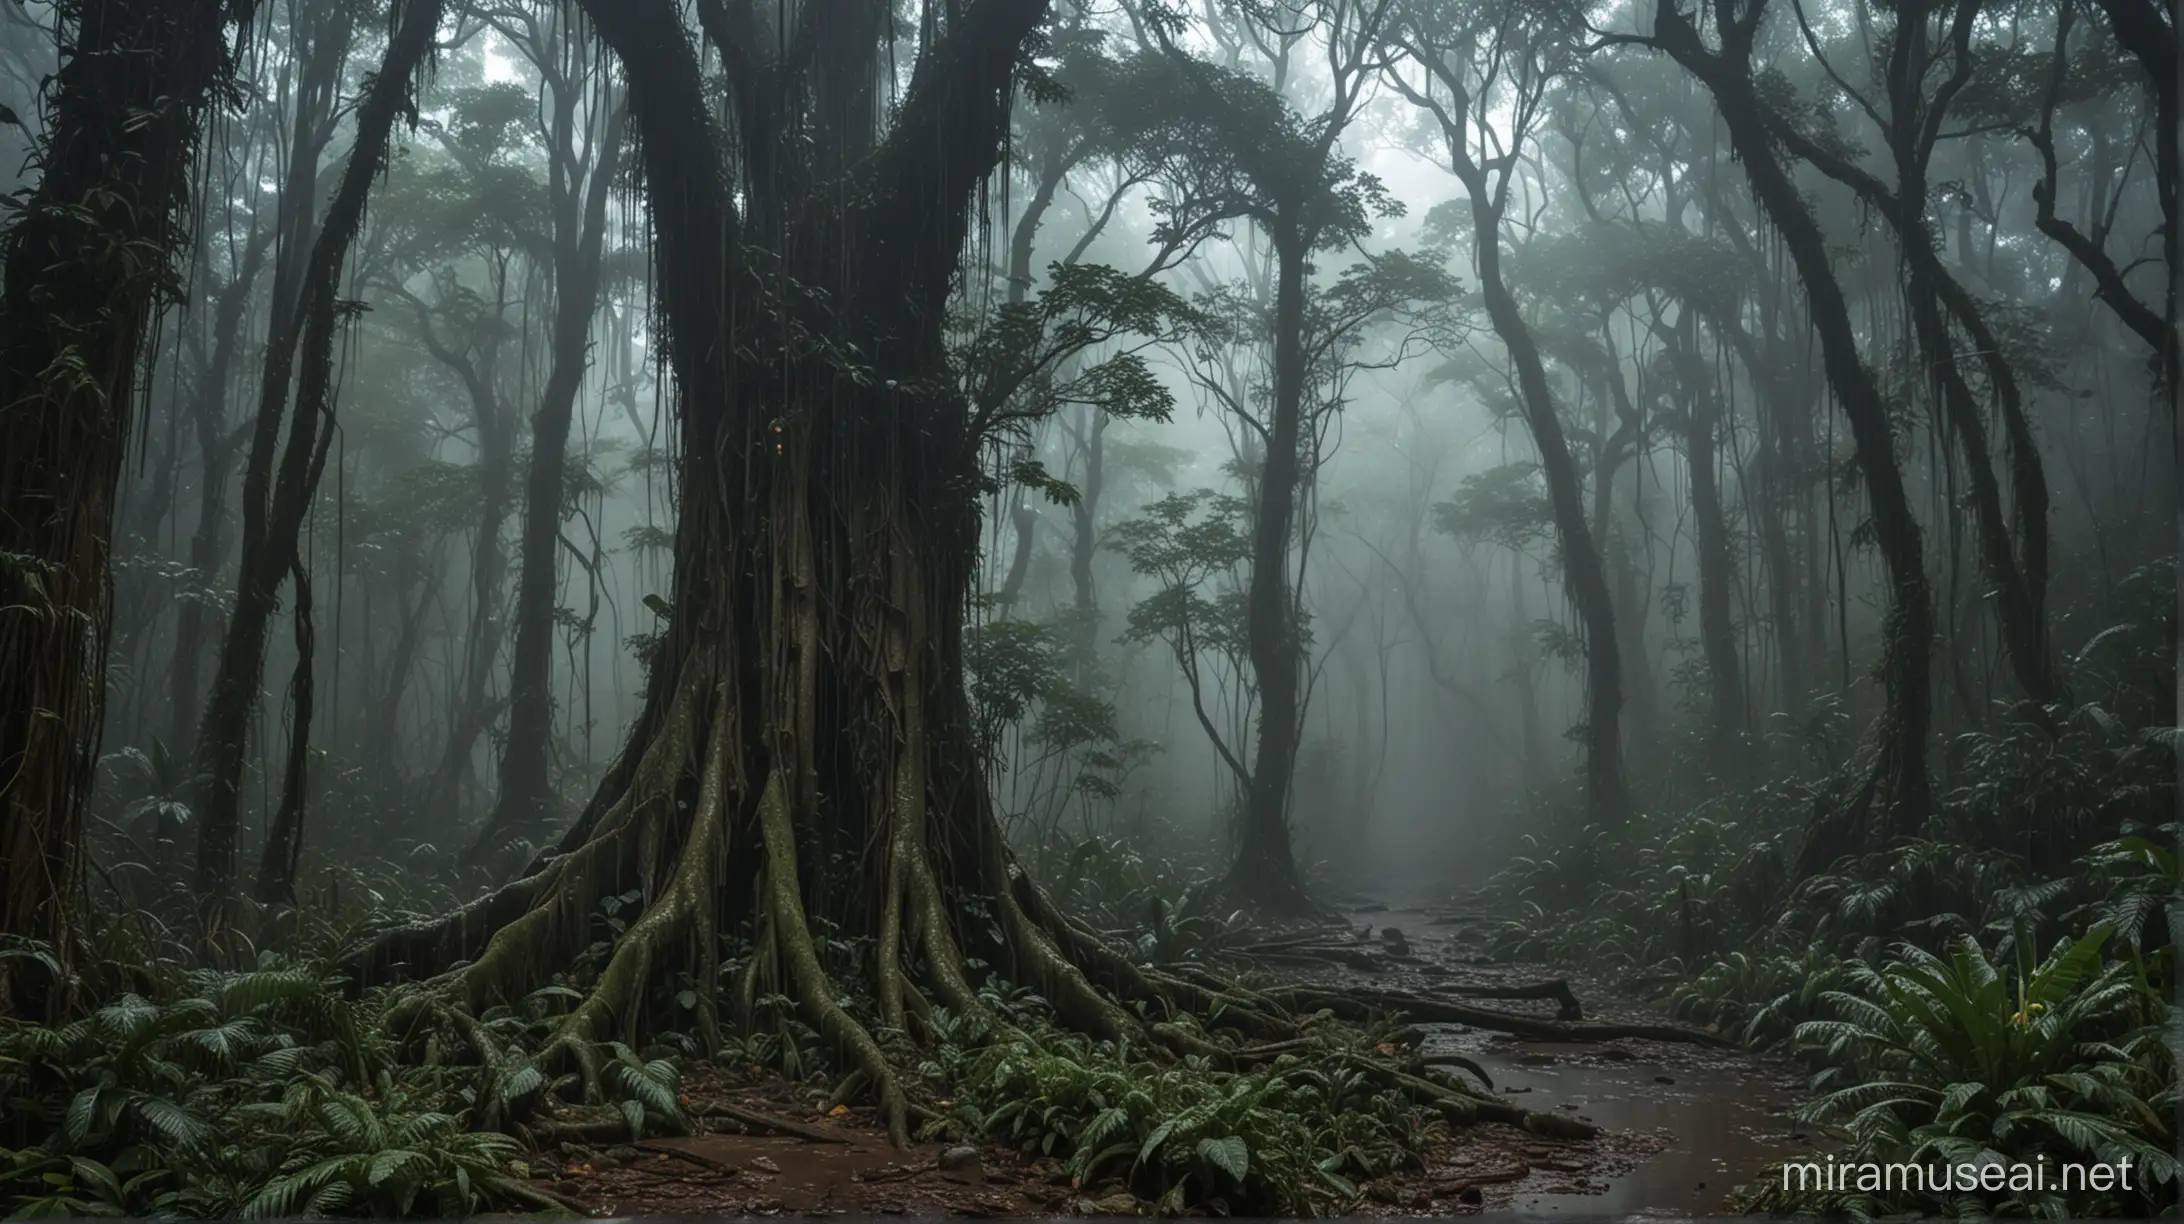 Enigmatic Legends of the Mysterious Tropical Forests